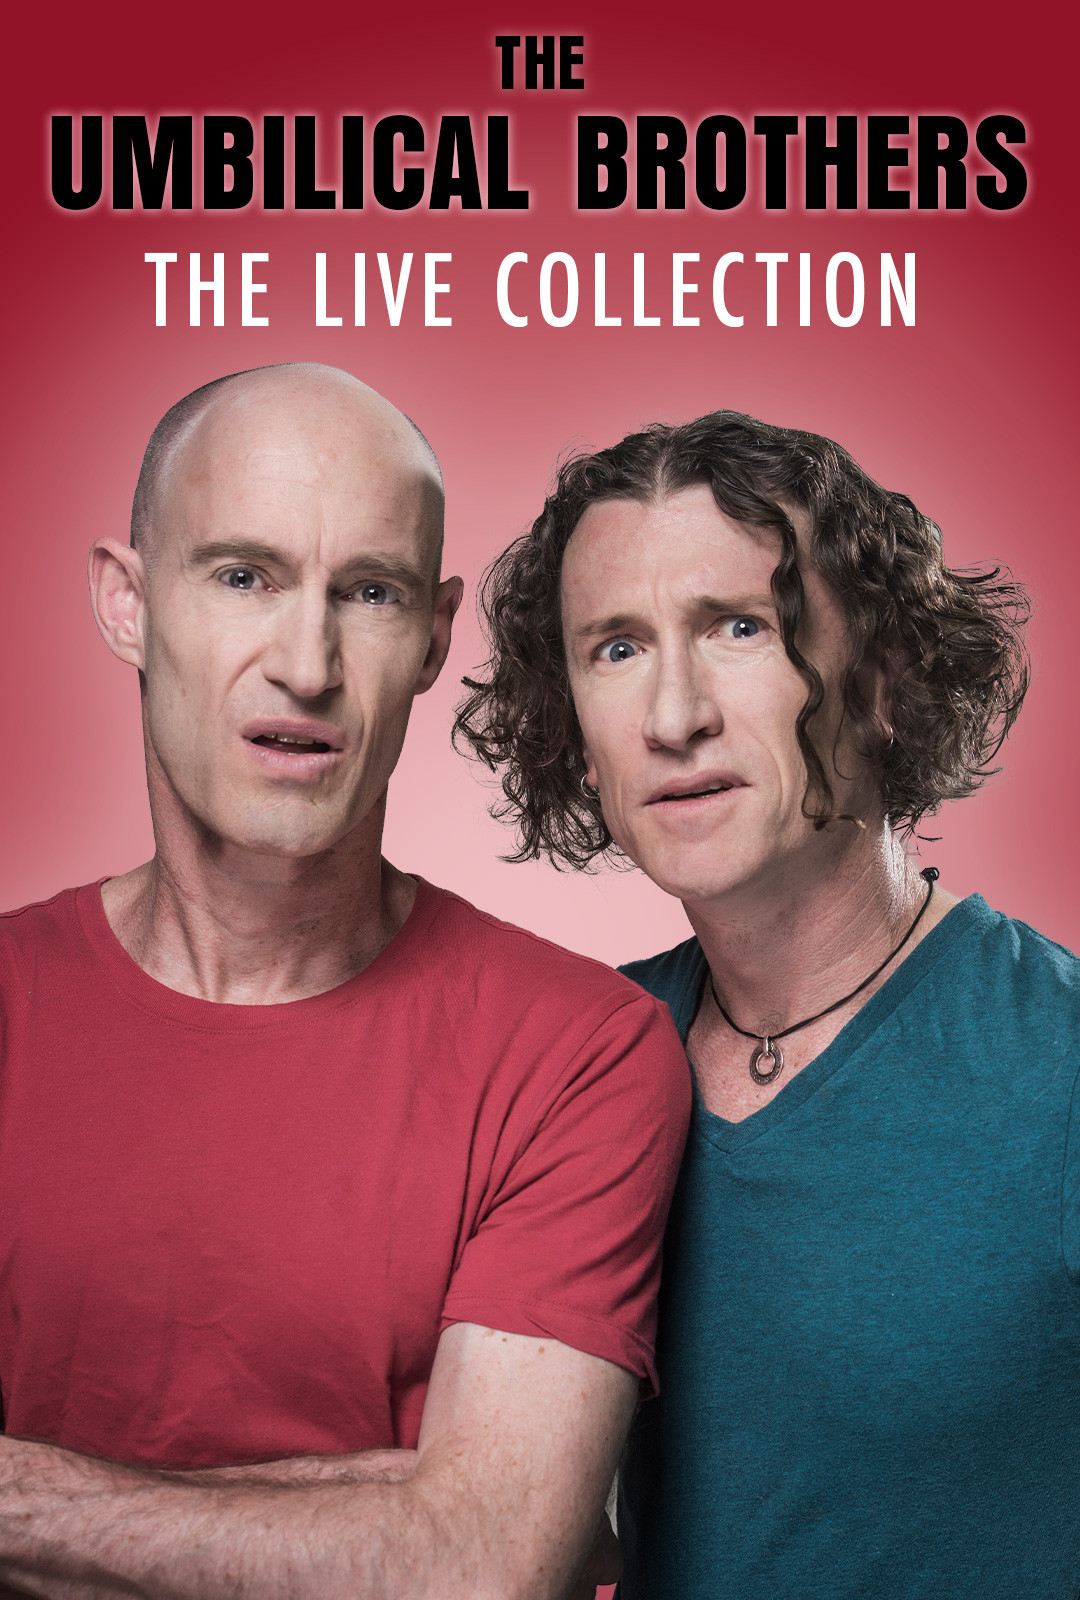 The Umbilical Brothers - The Live Collection VOD